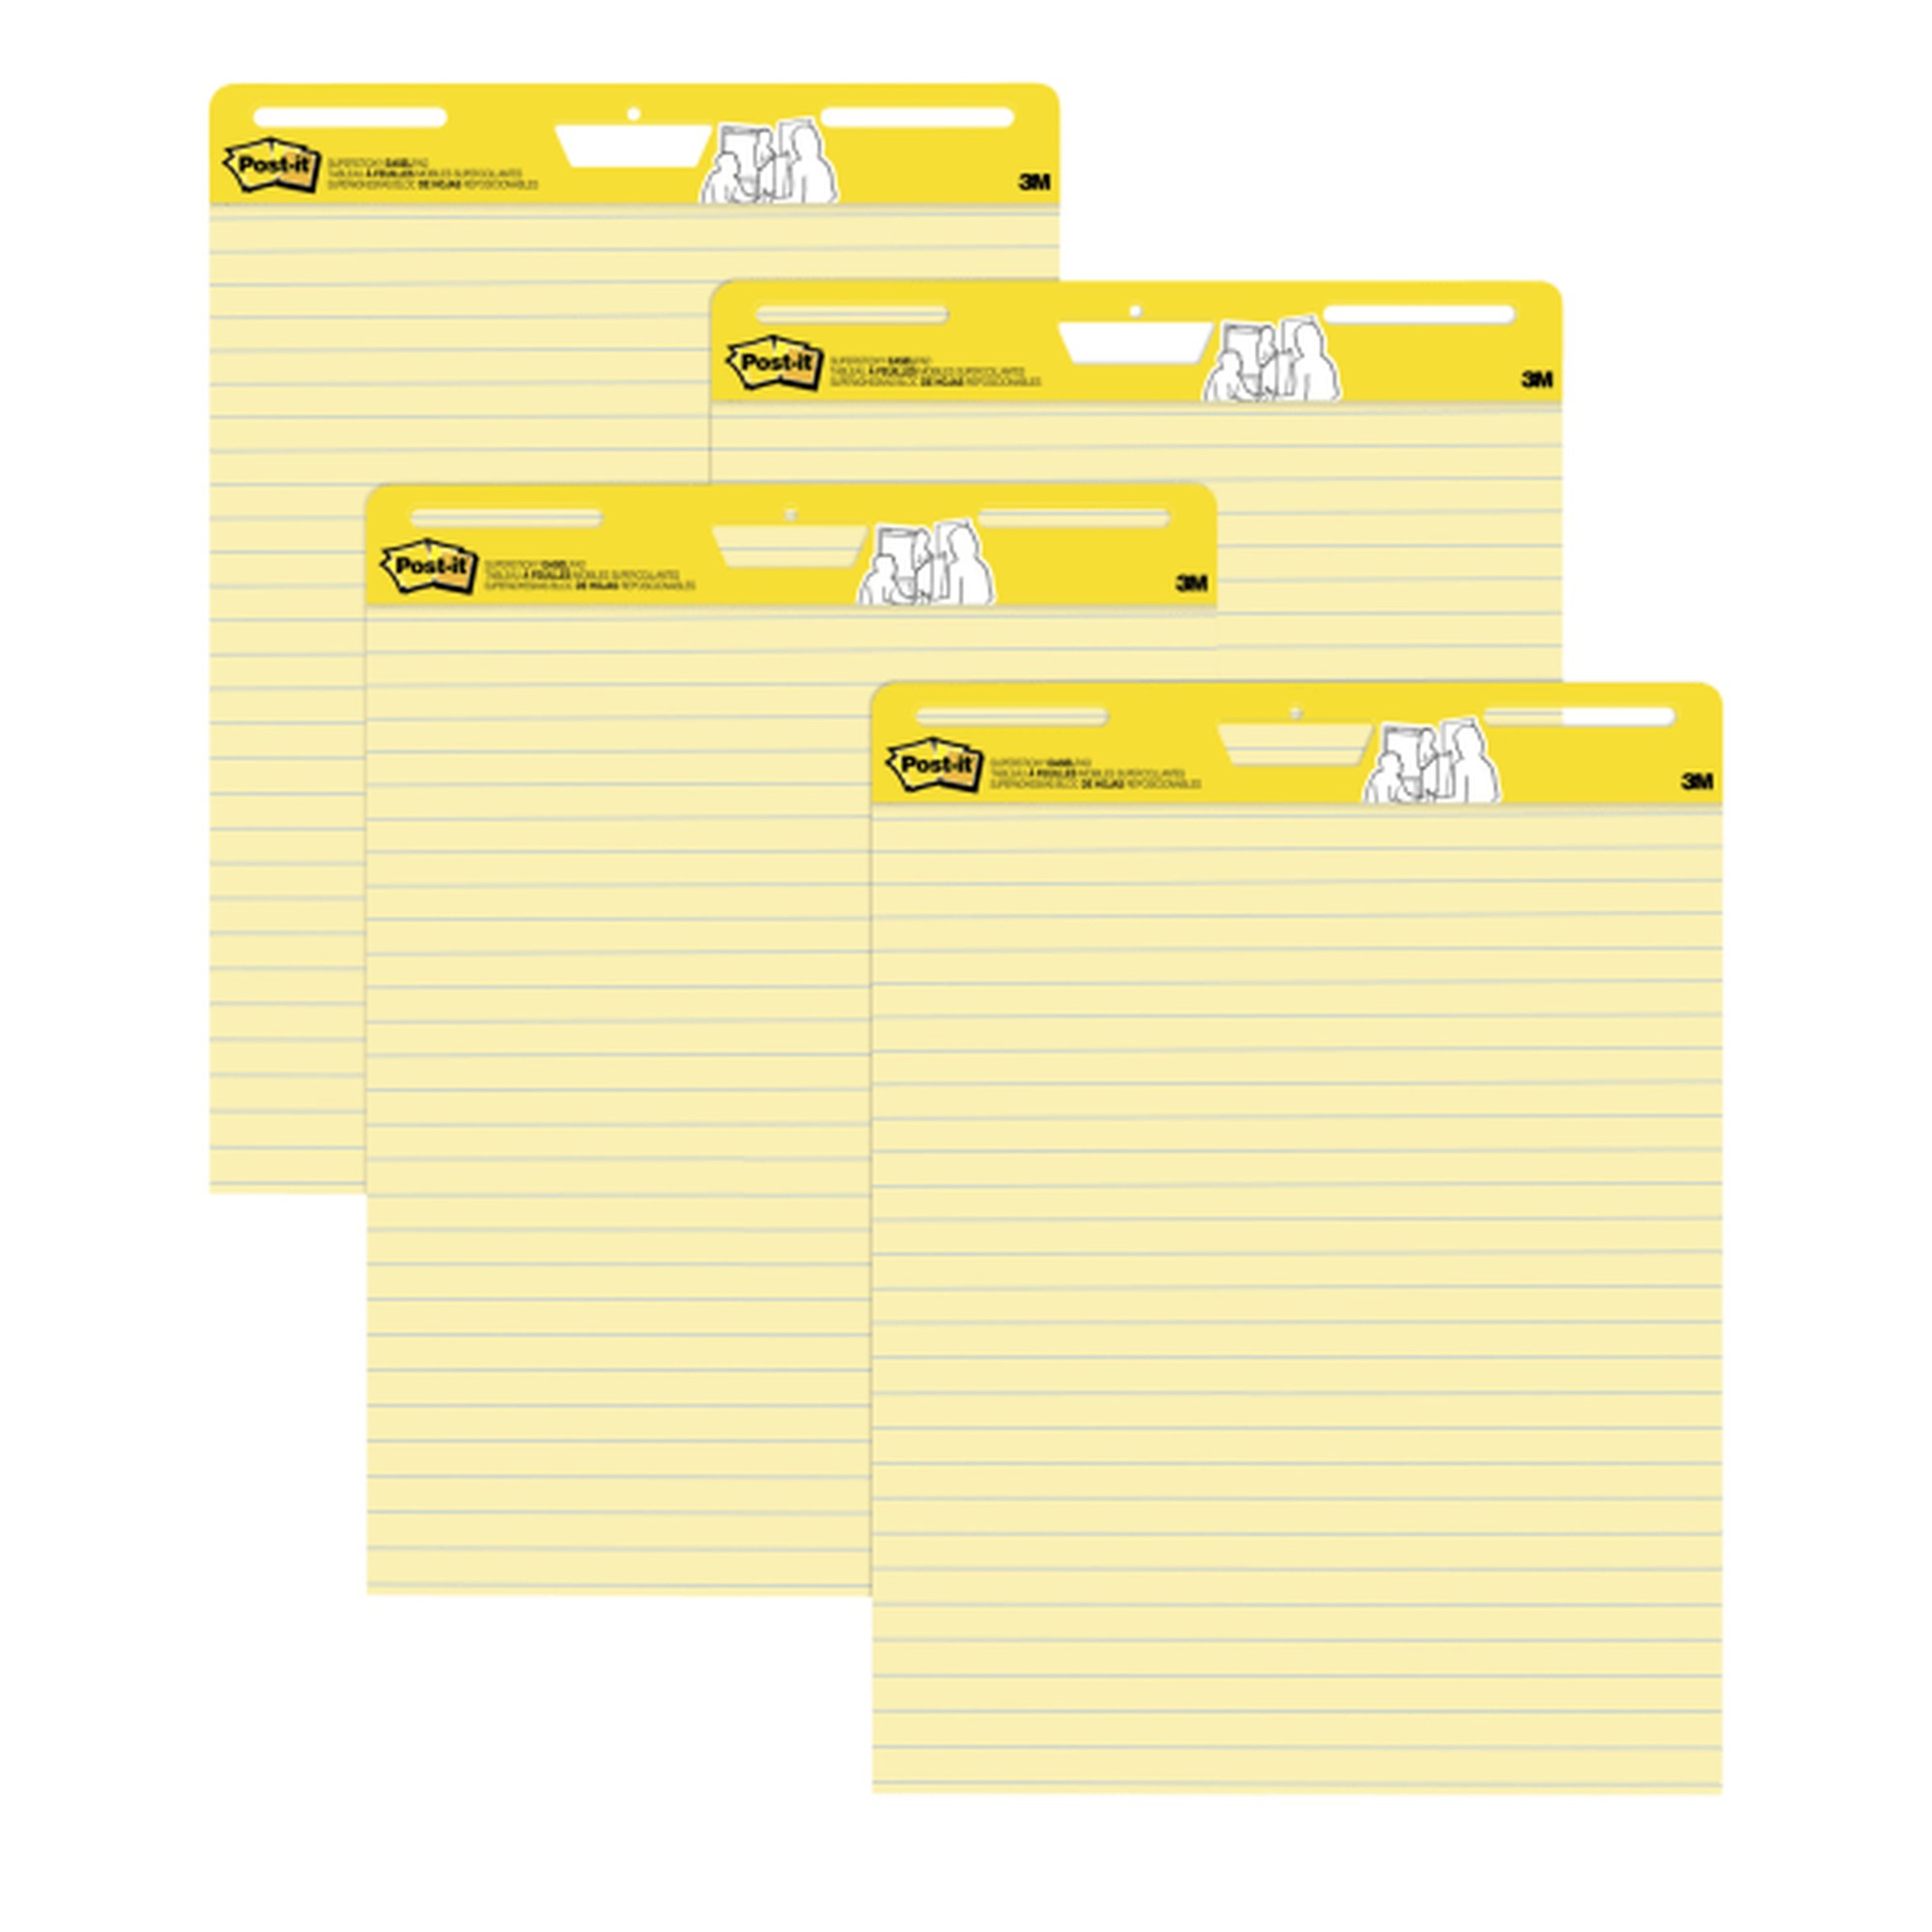 Post-it Super Sticky Easel Pad - 30 Sheets - Stapled - Feint Blue Margin - 18.50 lb Basis Weight - 25" x 30" - Canary Yello